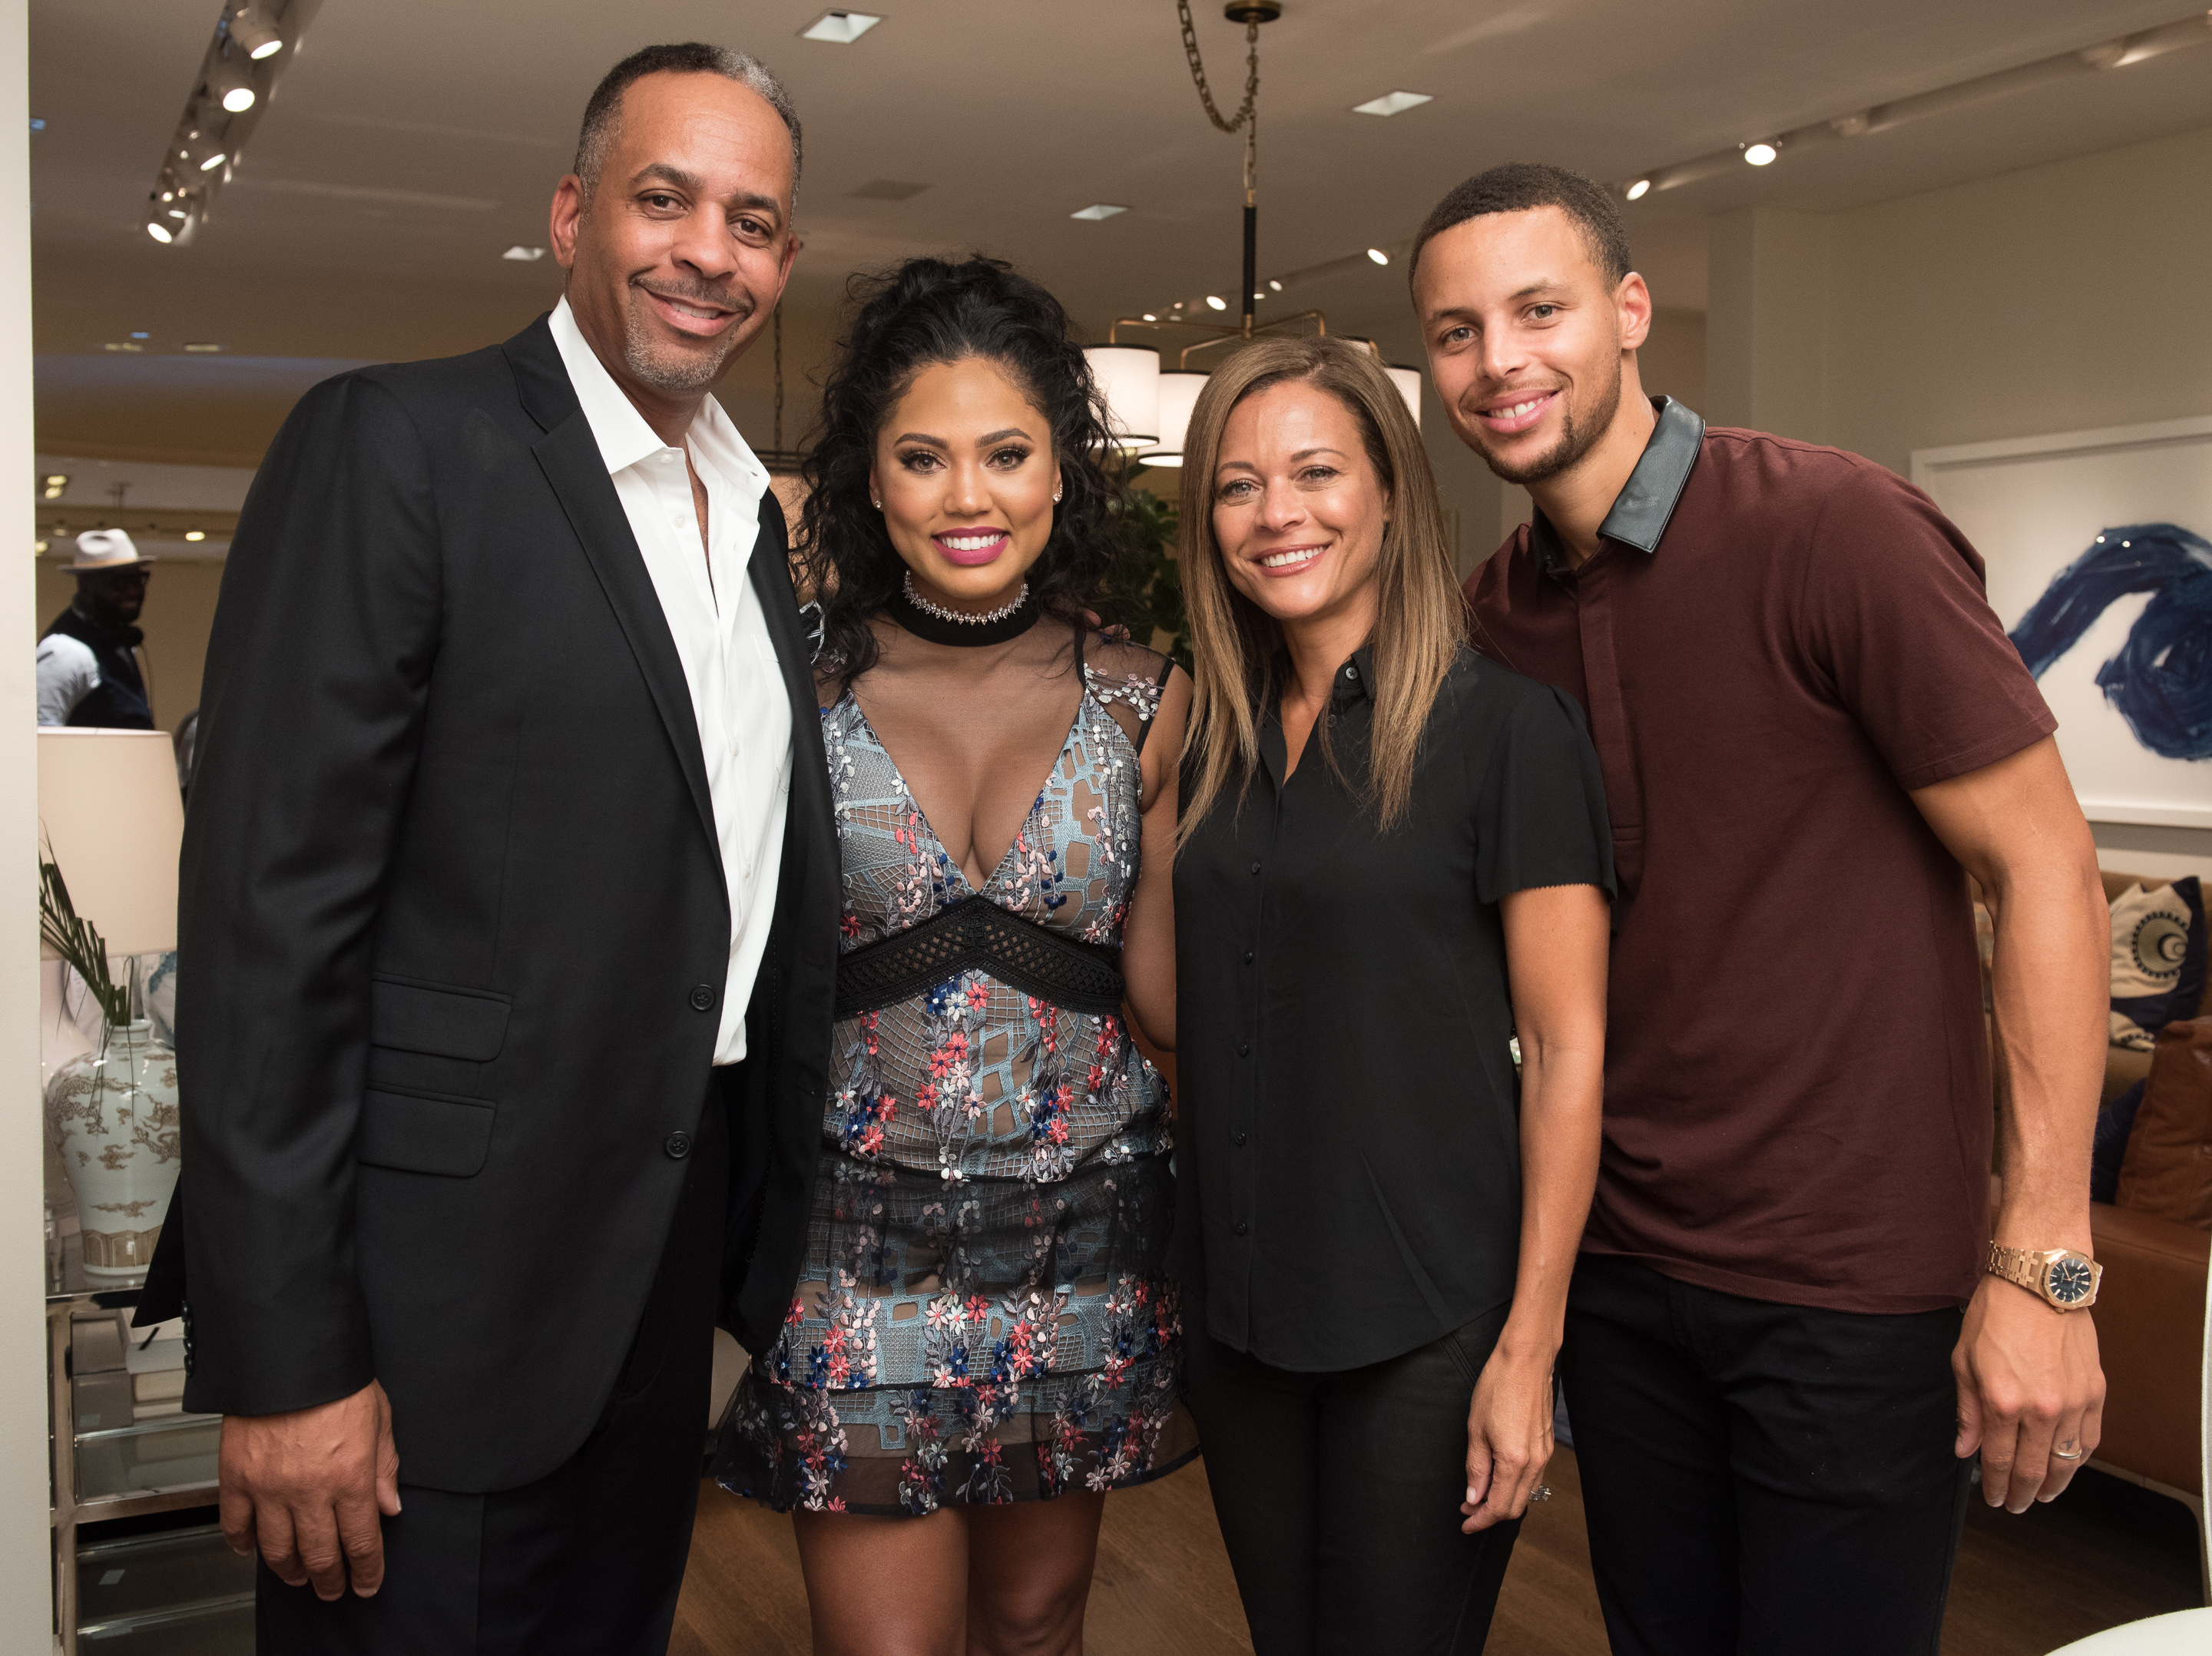 Dell Curry, Ayesha Curry, Sonya Curry and Stephen Curry at Williams-Sonoma Columbus Circle on September 20, 2016, in New York. | Source: Getty Images